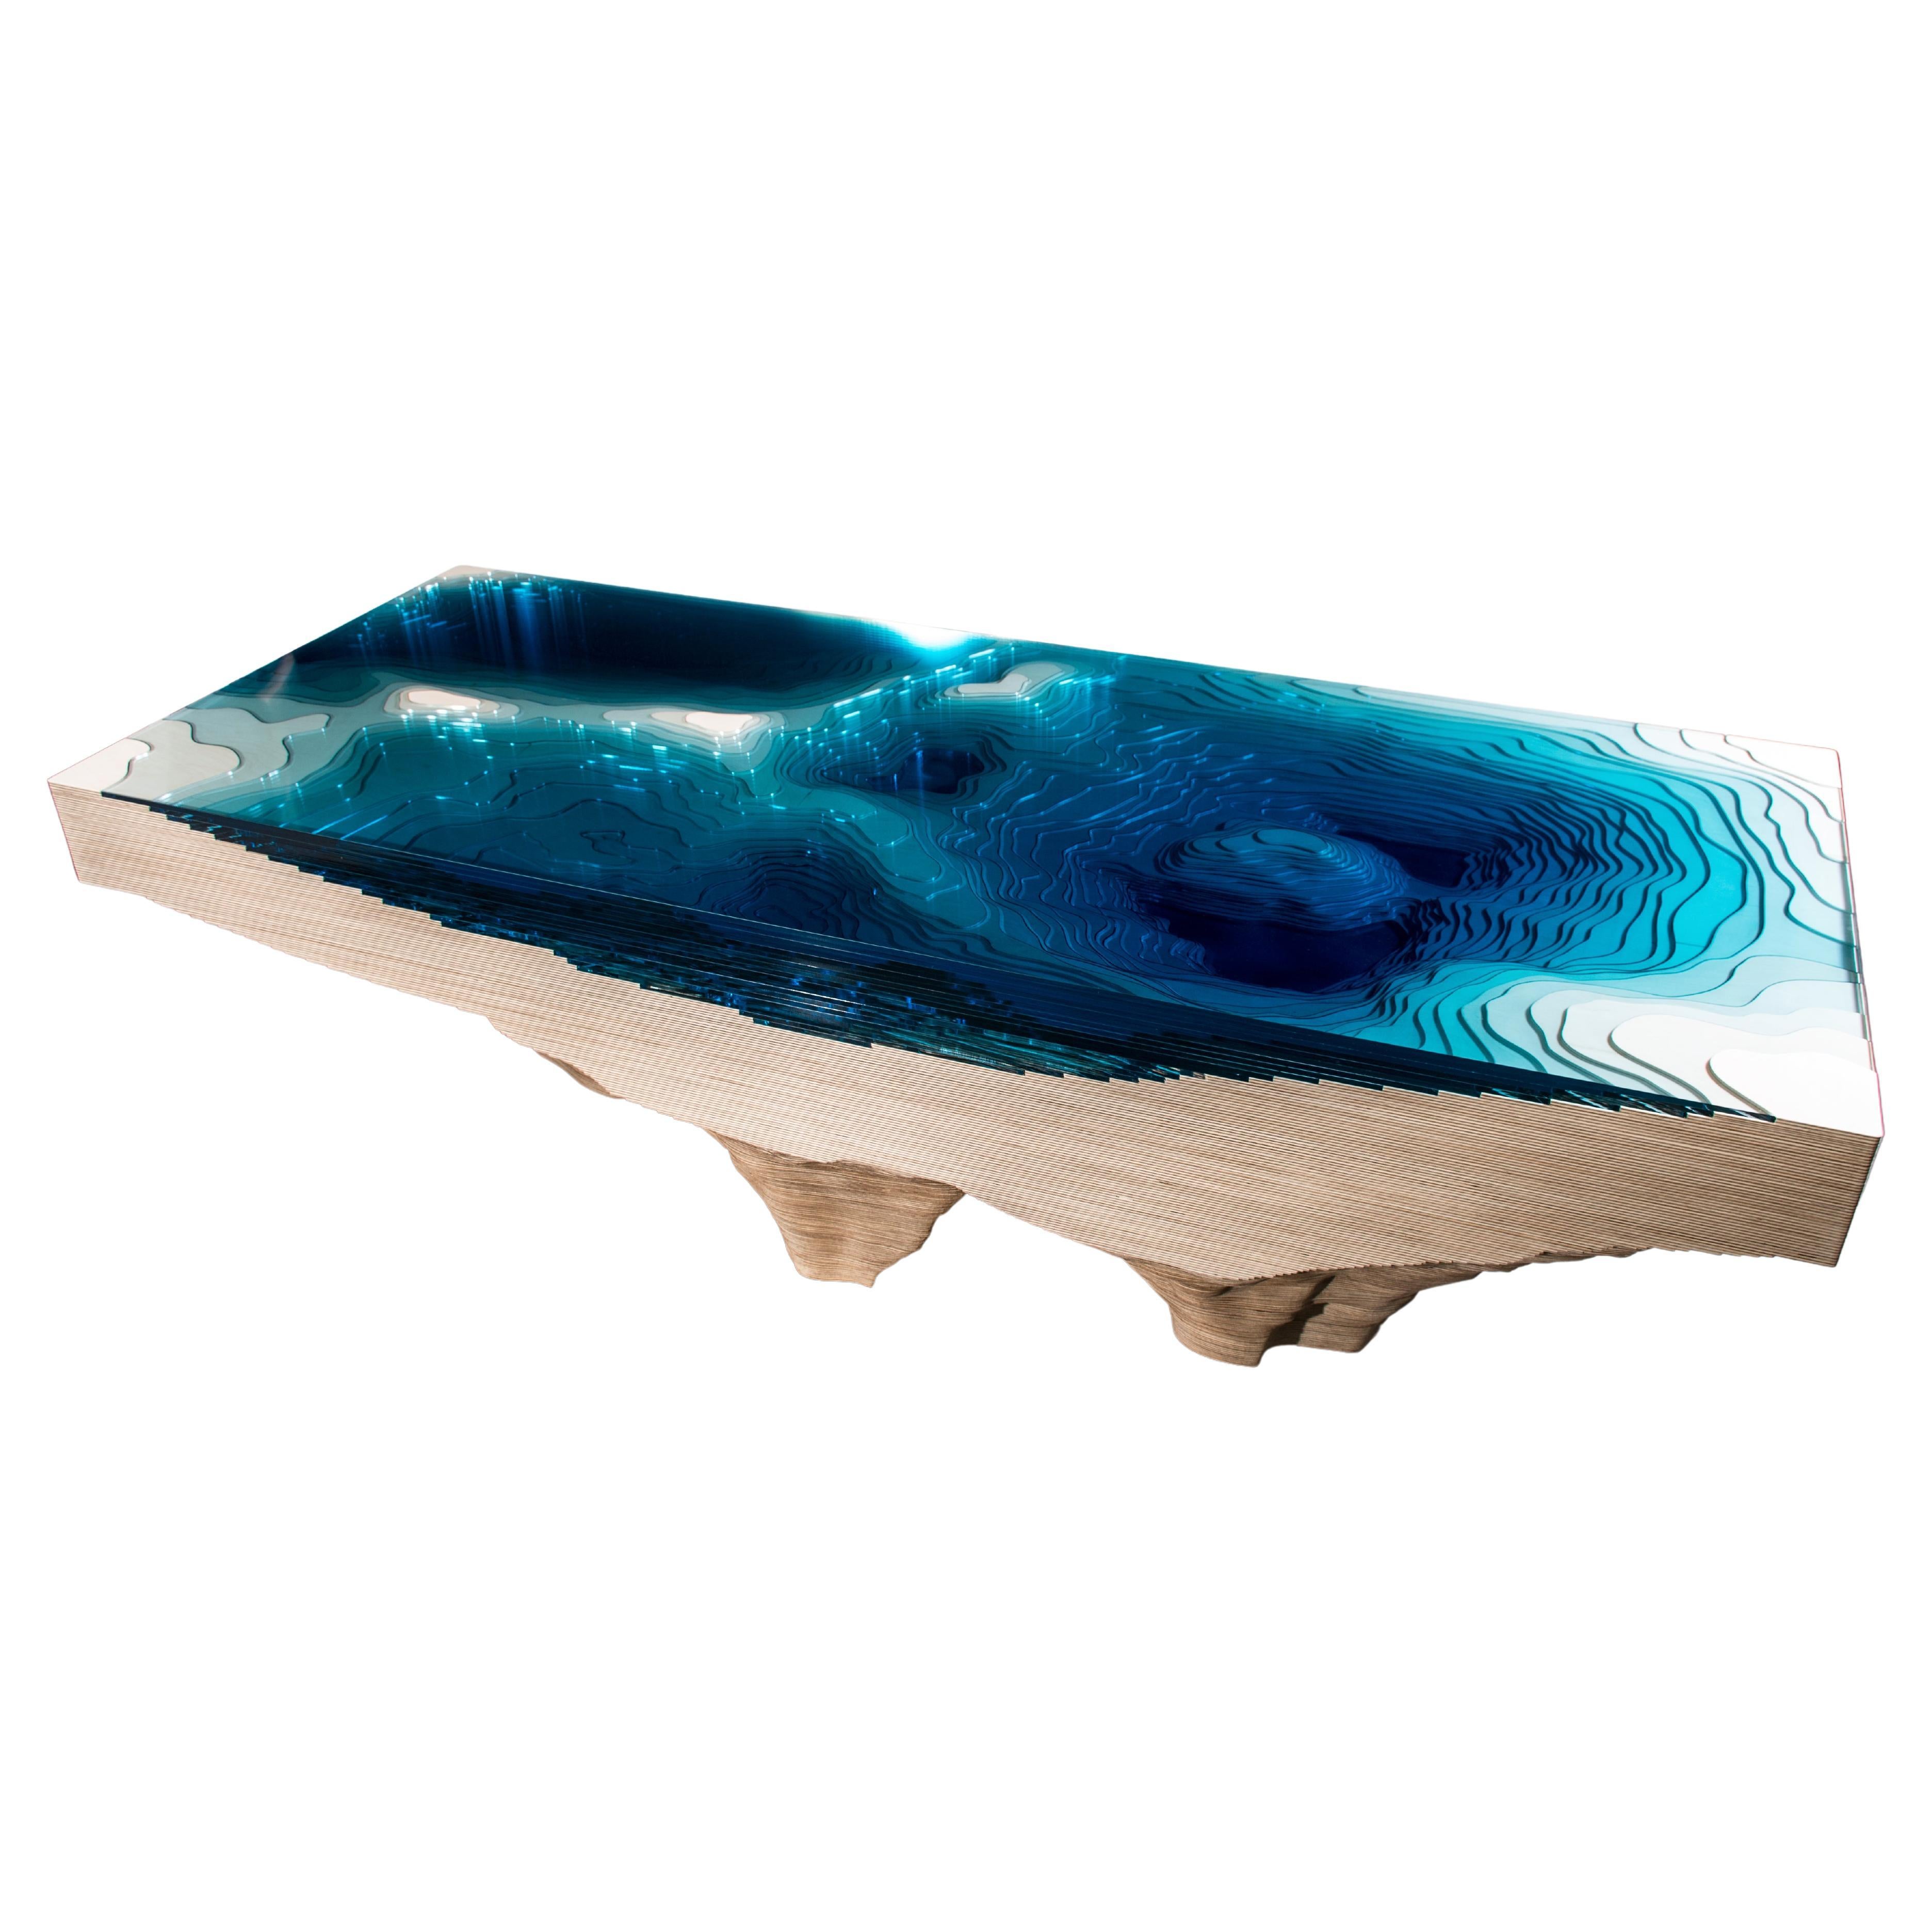 Modern 'Abyss Host' Centre Table in Wood & Blue Tinted Glass